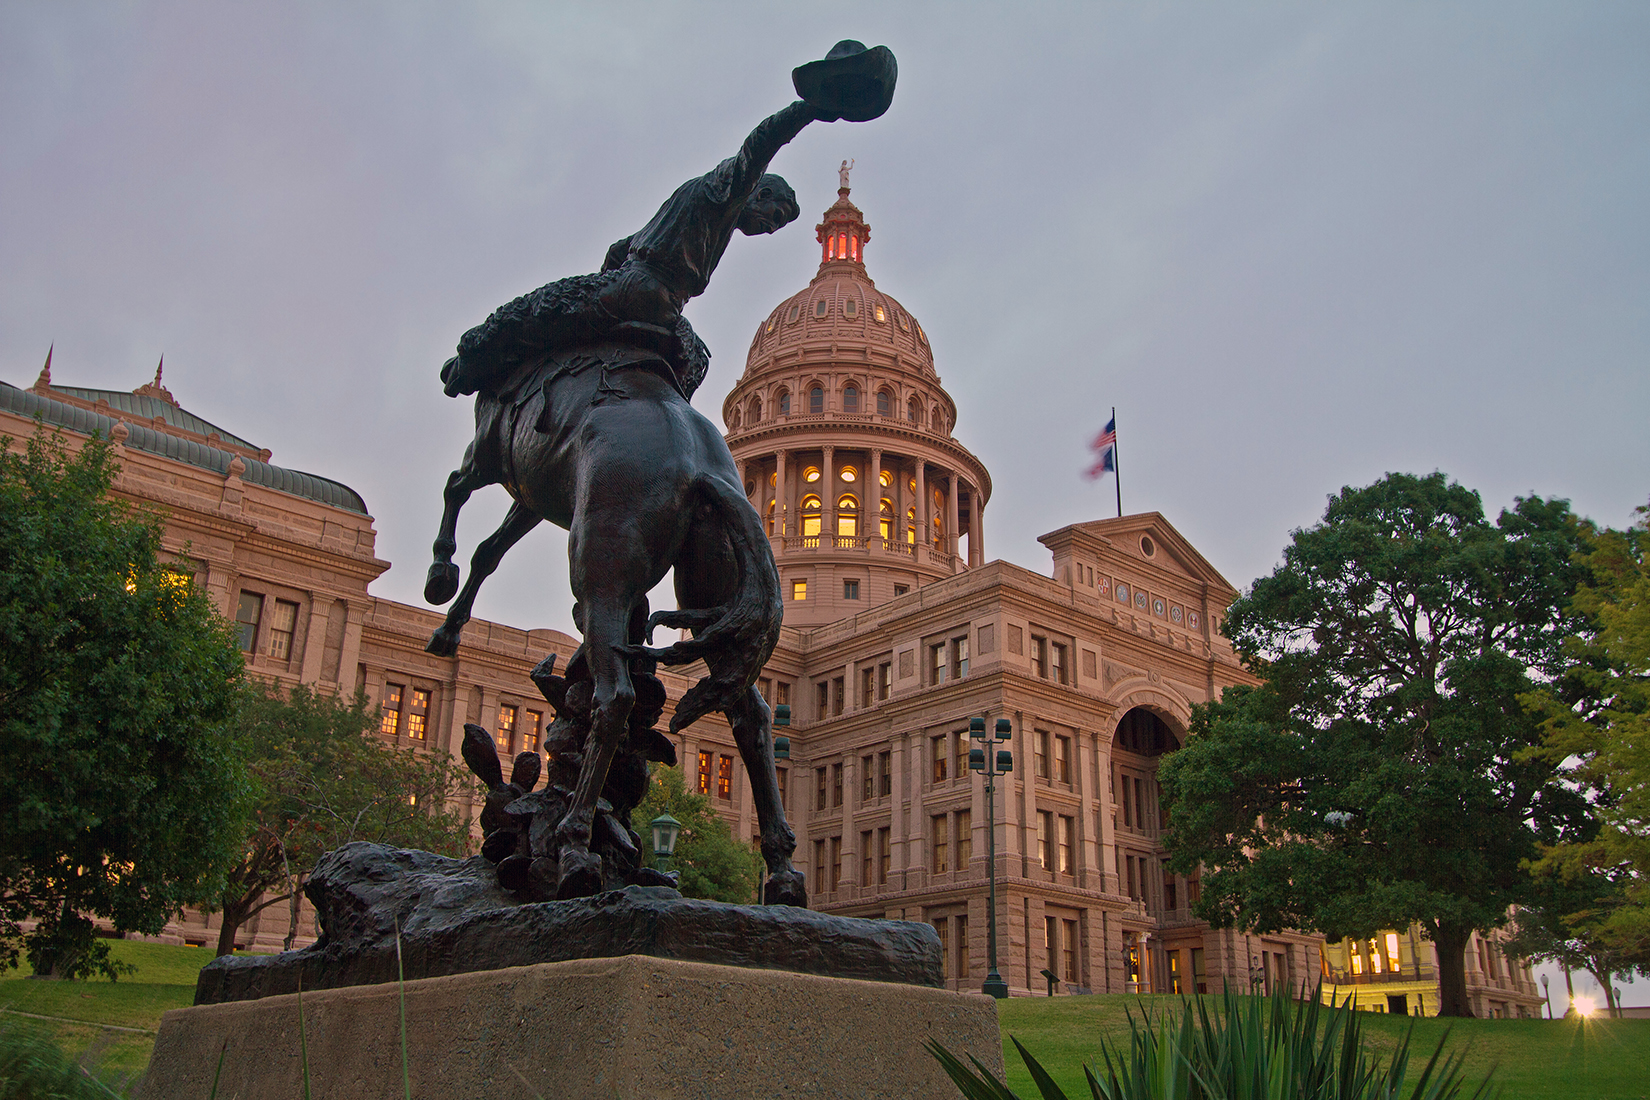 A statue of a man riding a horse with a cowboy hat in his hand in front of a capitol building